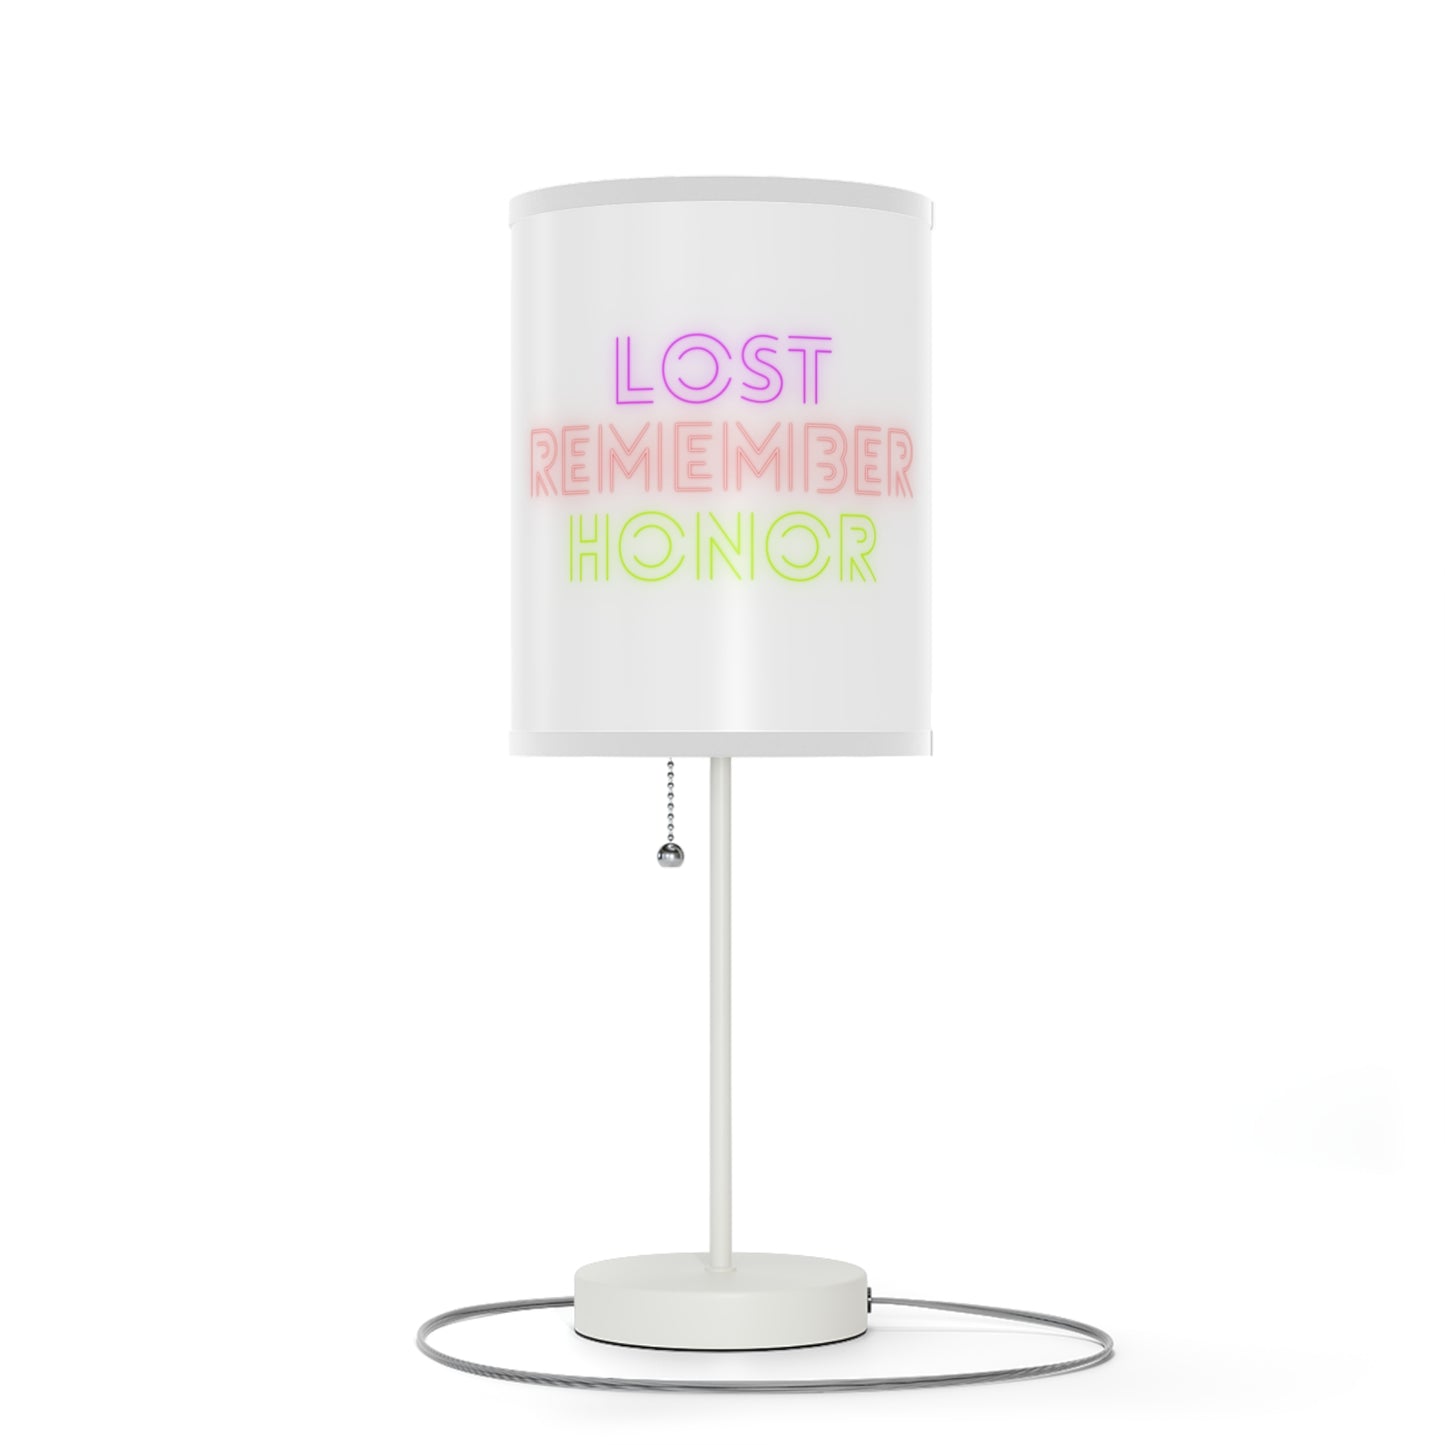 Lamp on a Stand, US|CA plug: Wolves White